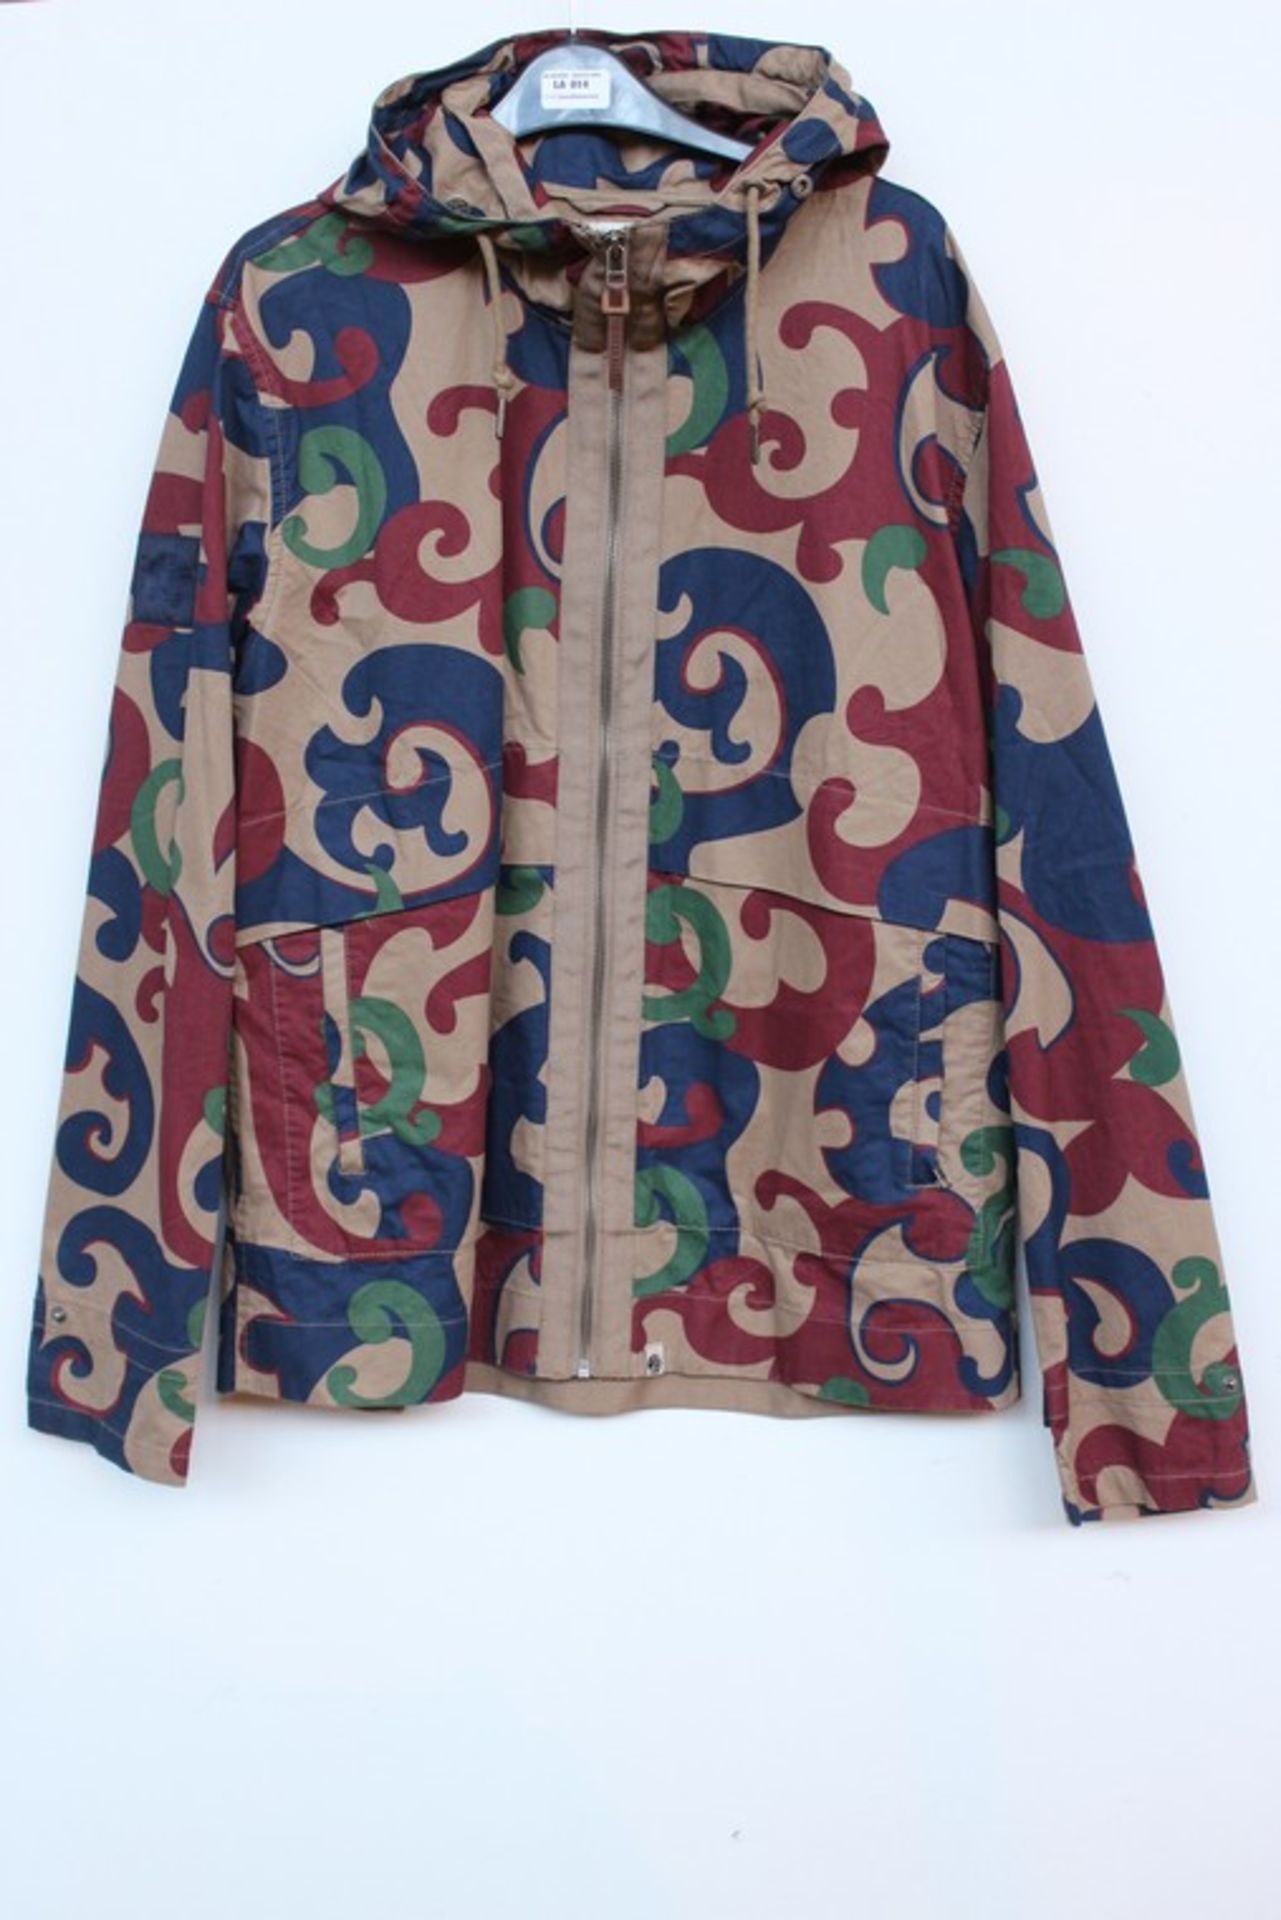 1 x PRETTY GREEN CAMO JACKET SIZE L RRP £200 (16.10.17) *PLEASE NOTE THAT THE BID PRICE IS